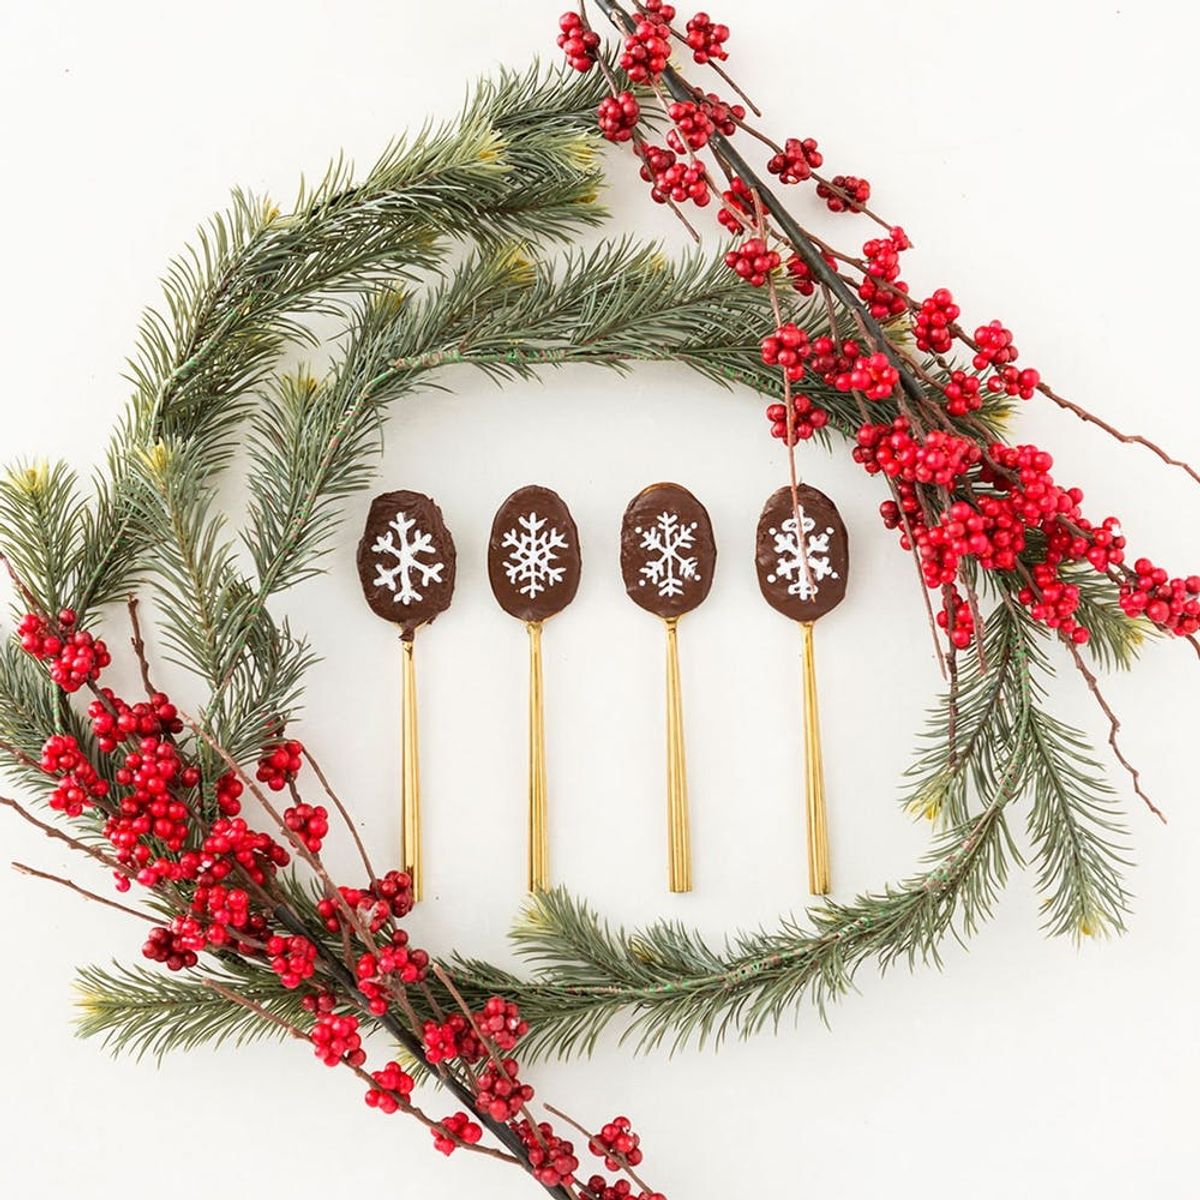 Stir Up Something Sweet With These PB&J Chocolate Spoons